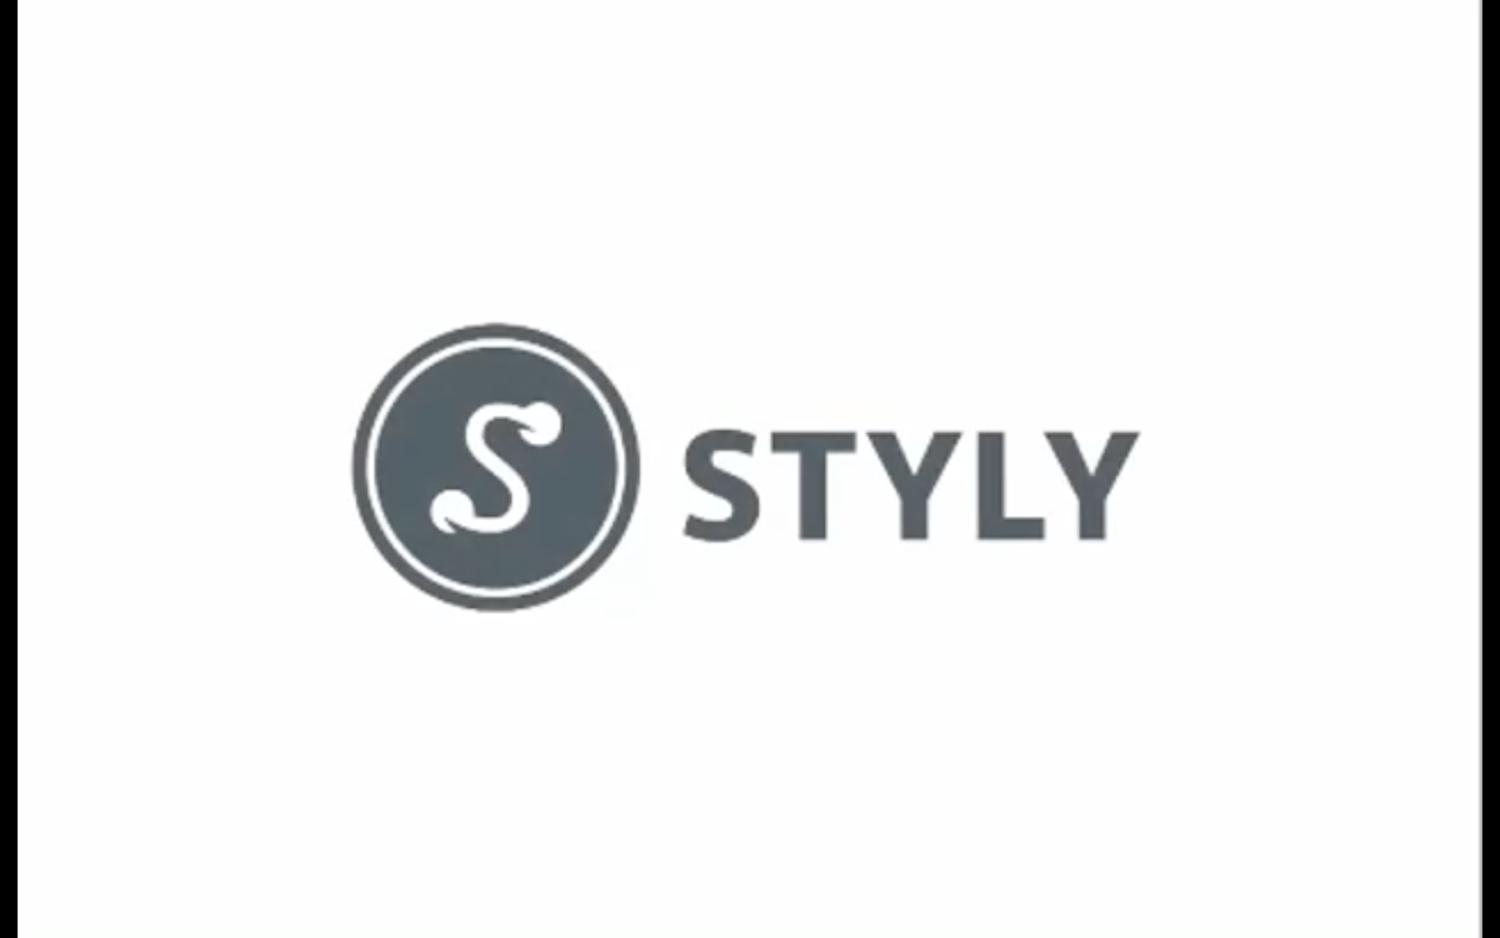 Episode 77 - STYLY Global